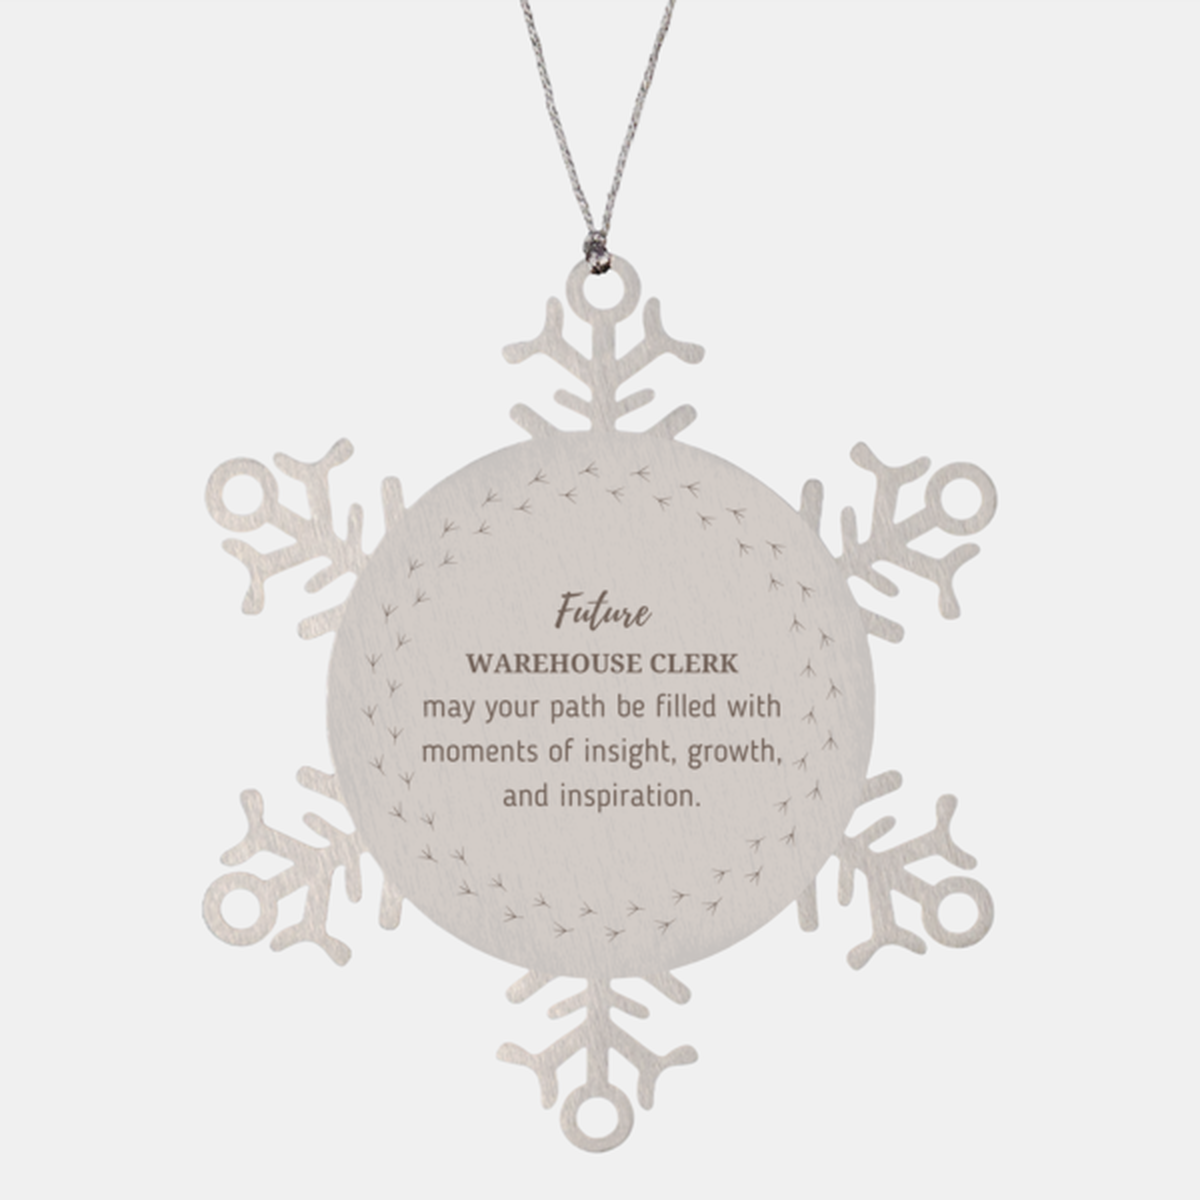 Future Warehouse Clerk Gifts, May your path be filled with moments of insight, Graduation Gifts for New Warehouse Clerk, Christmas Unique Snowflake Ornament For Men, Women, Friends